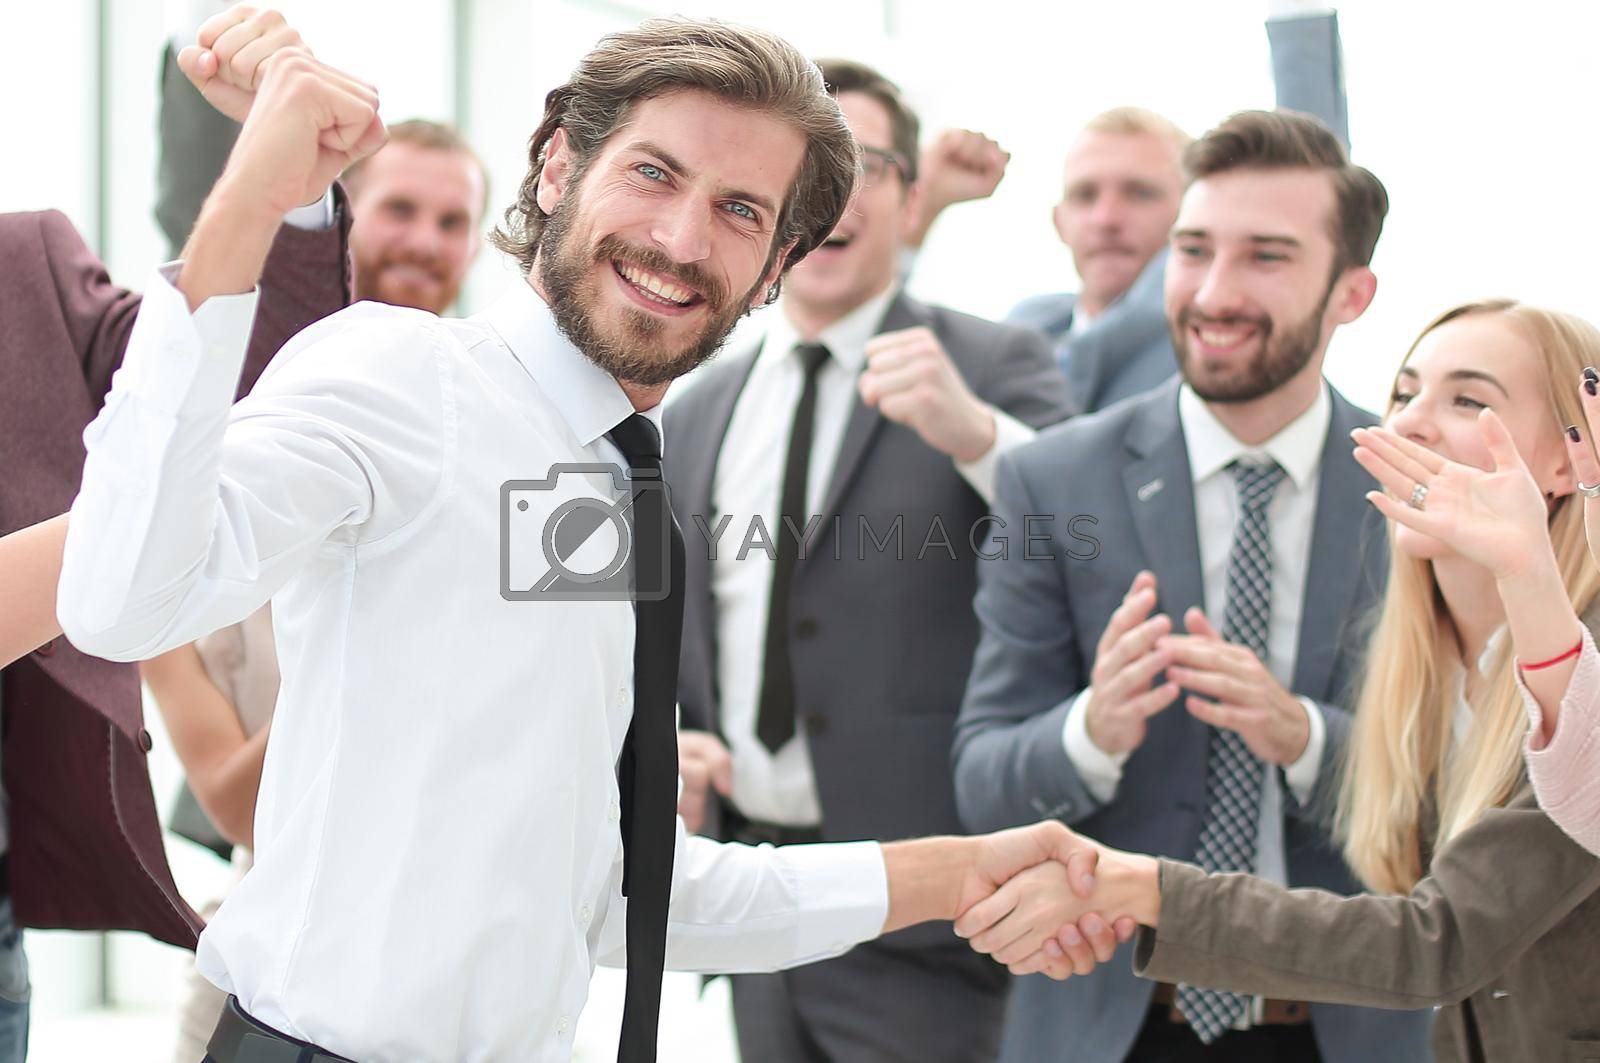 happy young businessman on business team background. photo with copy space